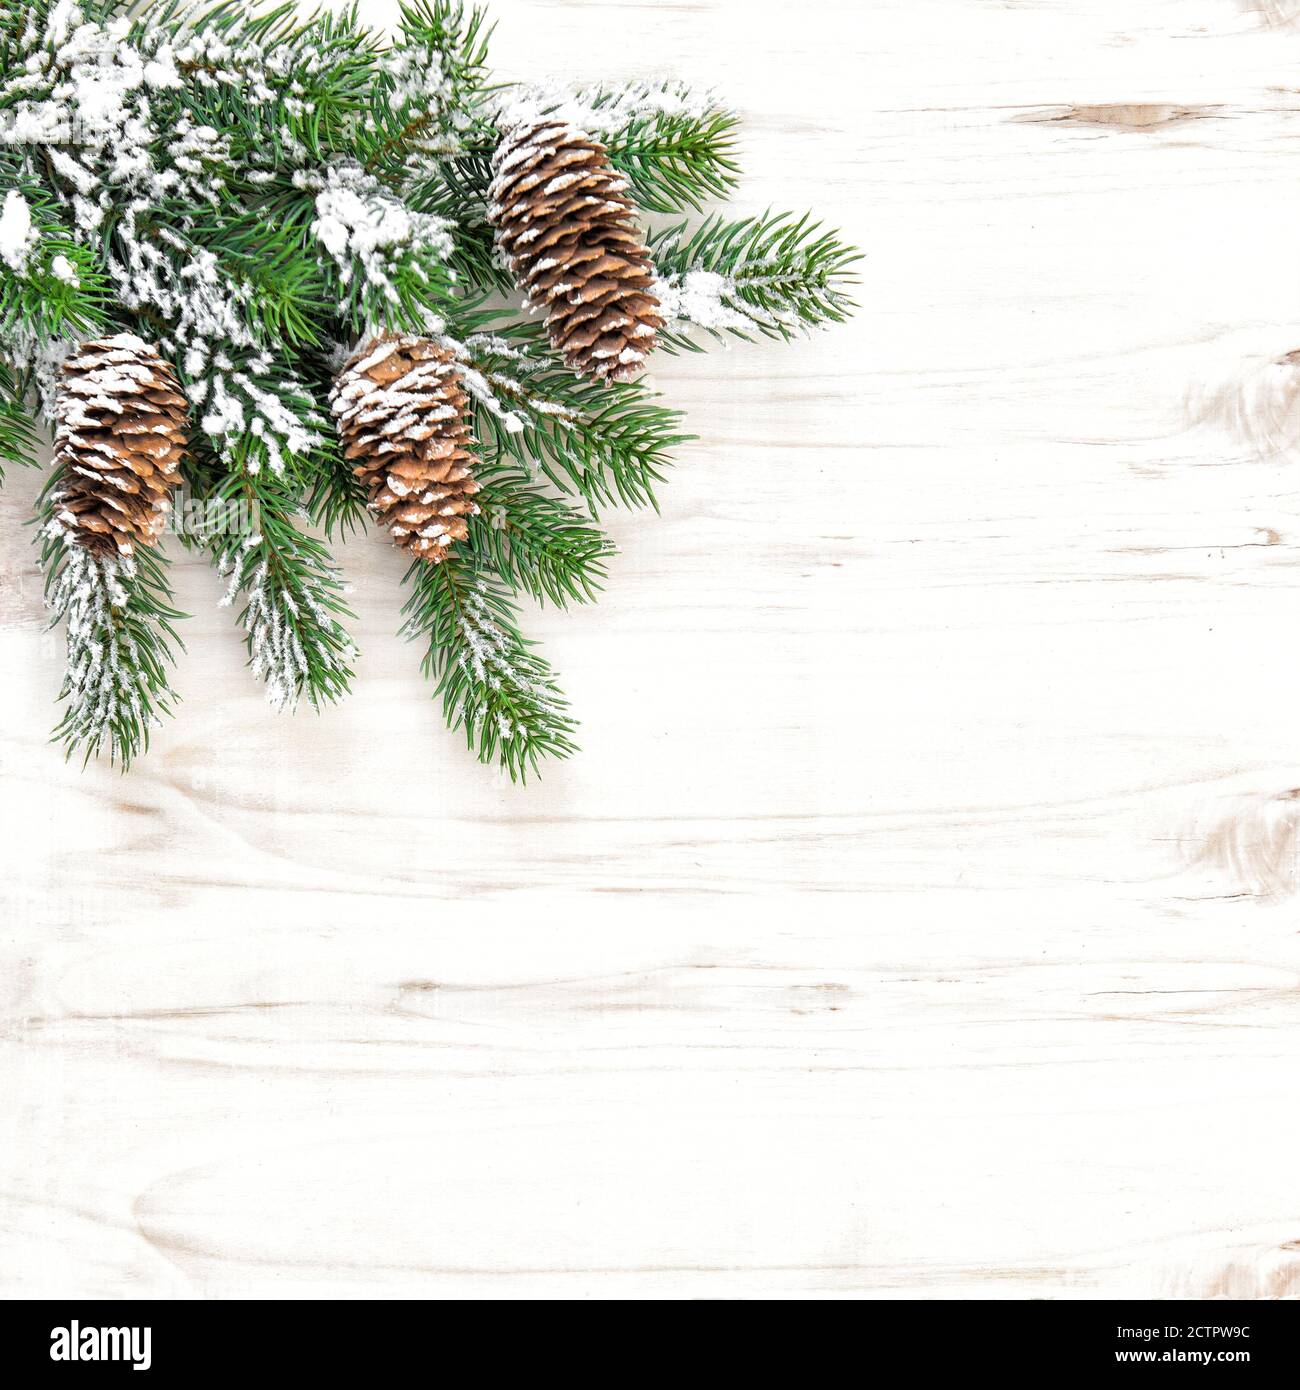 Christmas background. Pine tree branches with snow decoration Stock Photo